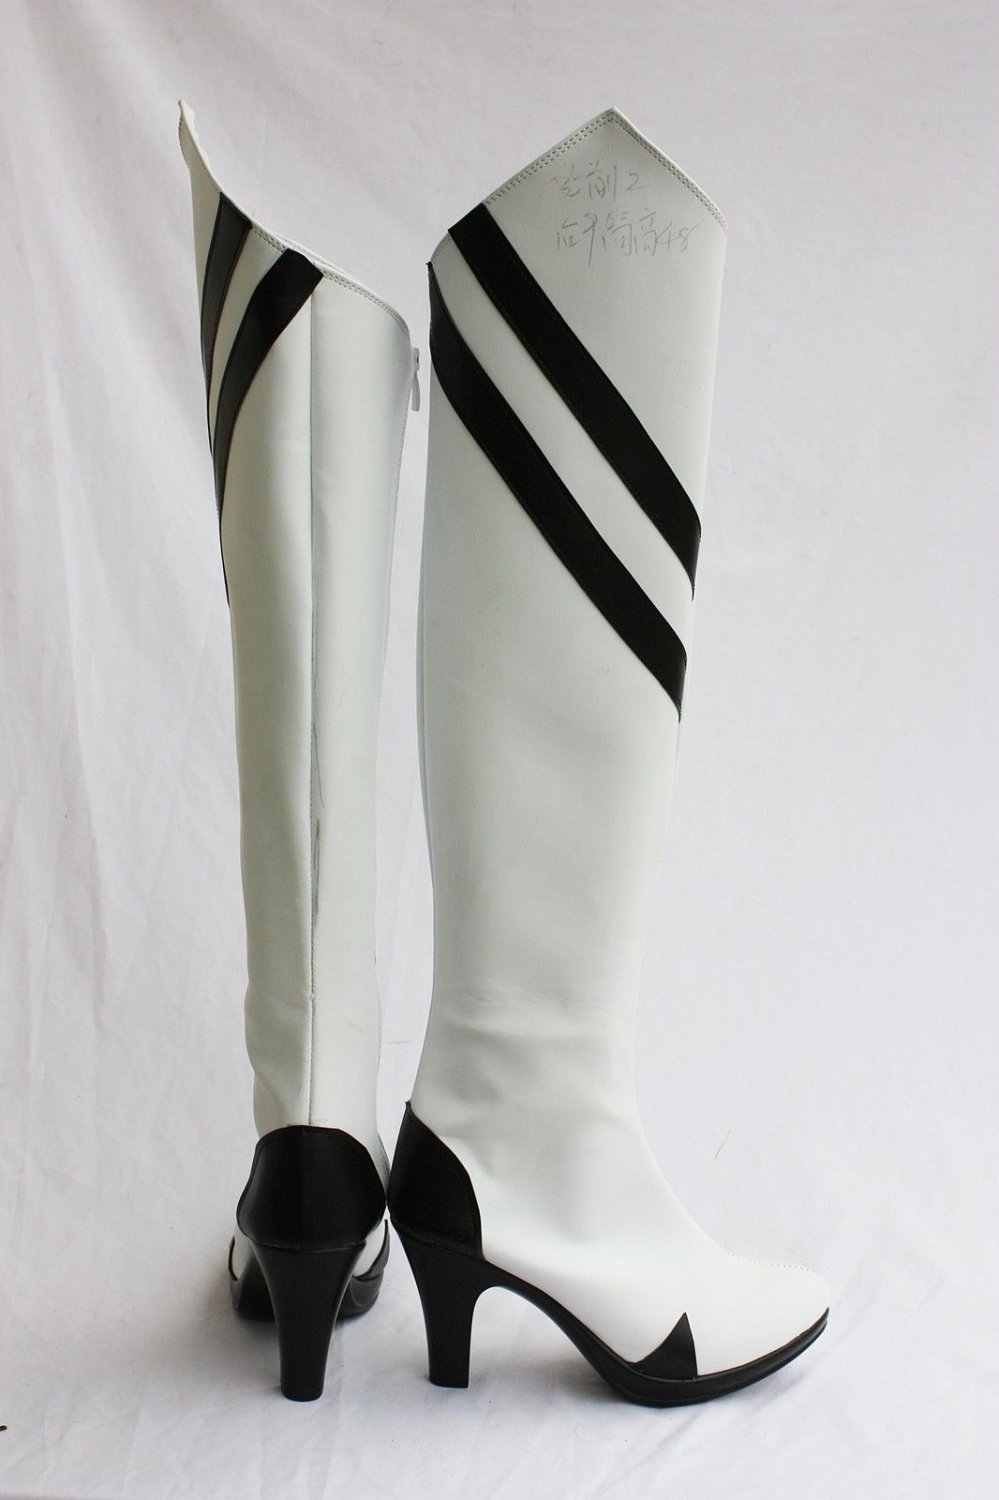 Neon Genesis Evangelion Ayanami Rei Cosplay Boots shoes black&white Ver ...